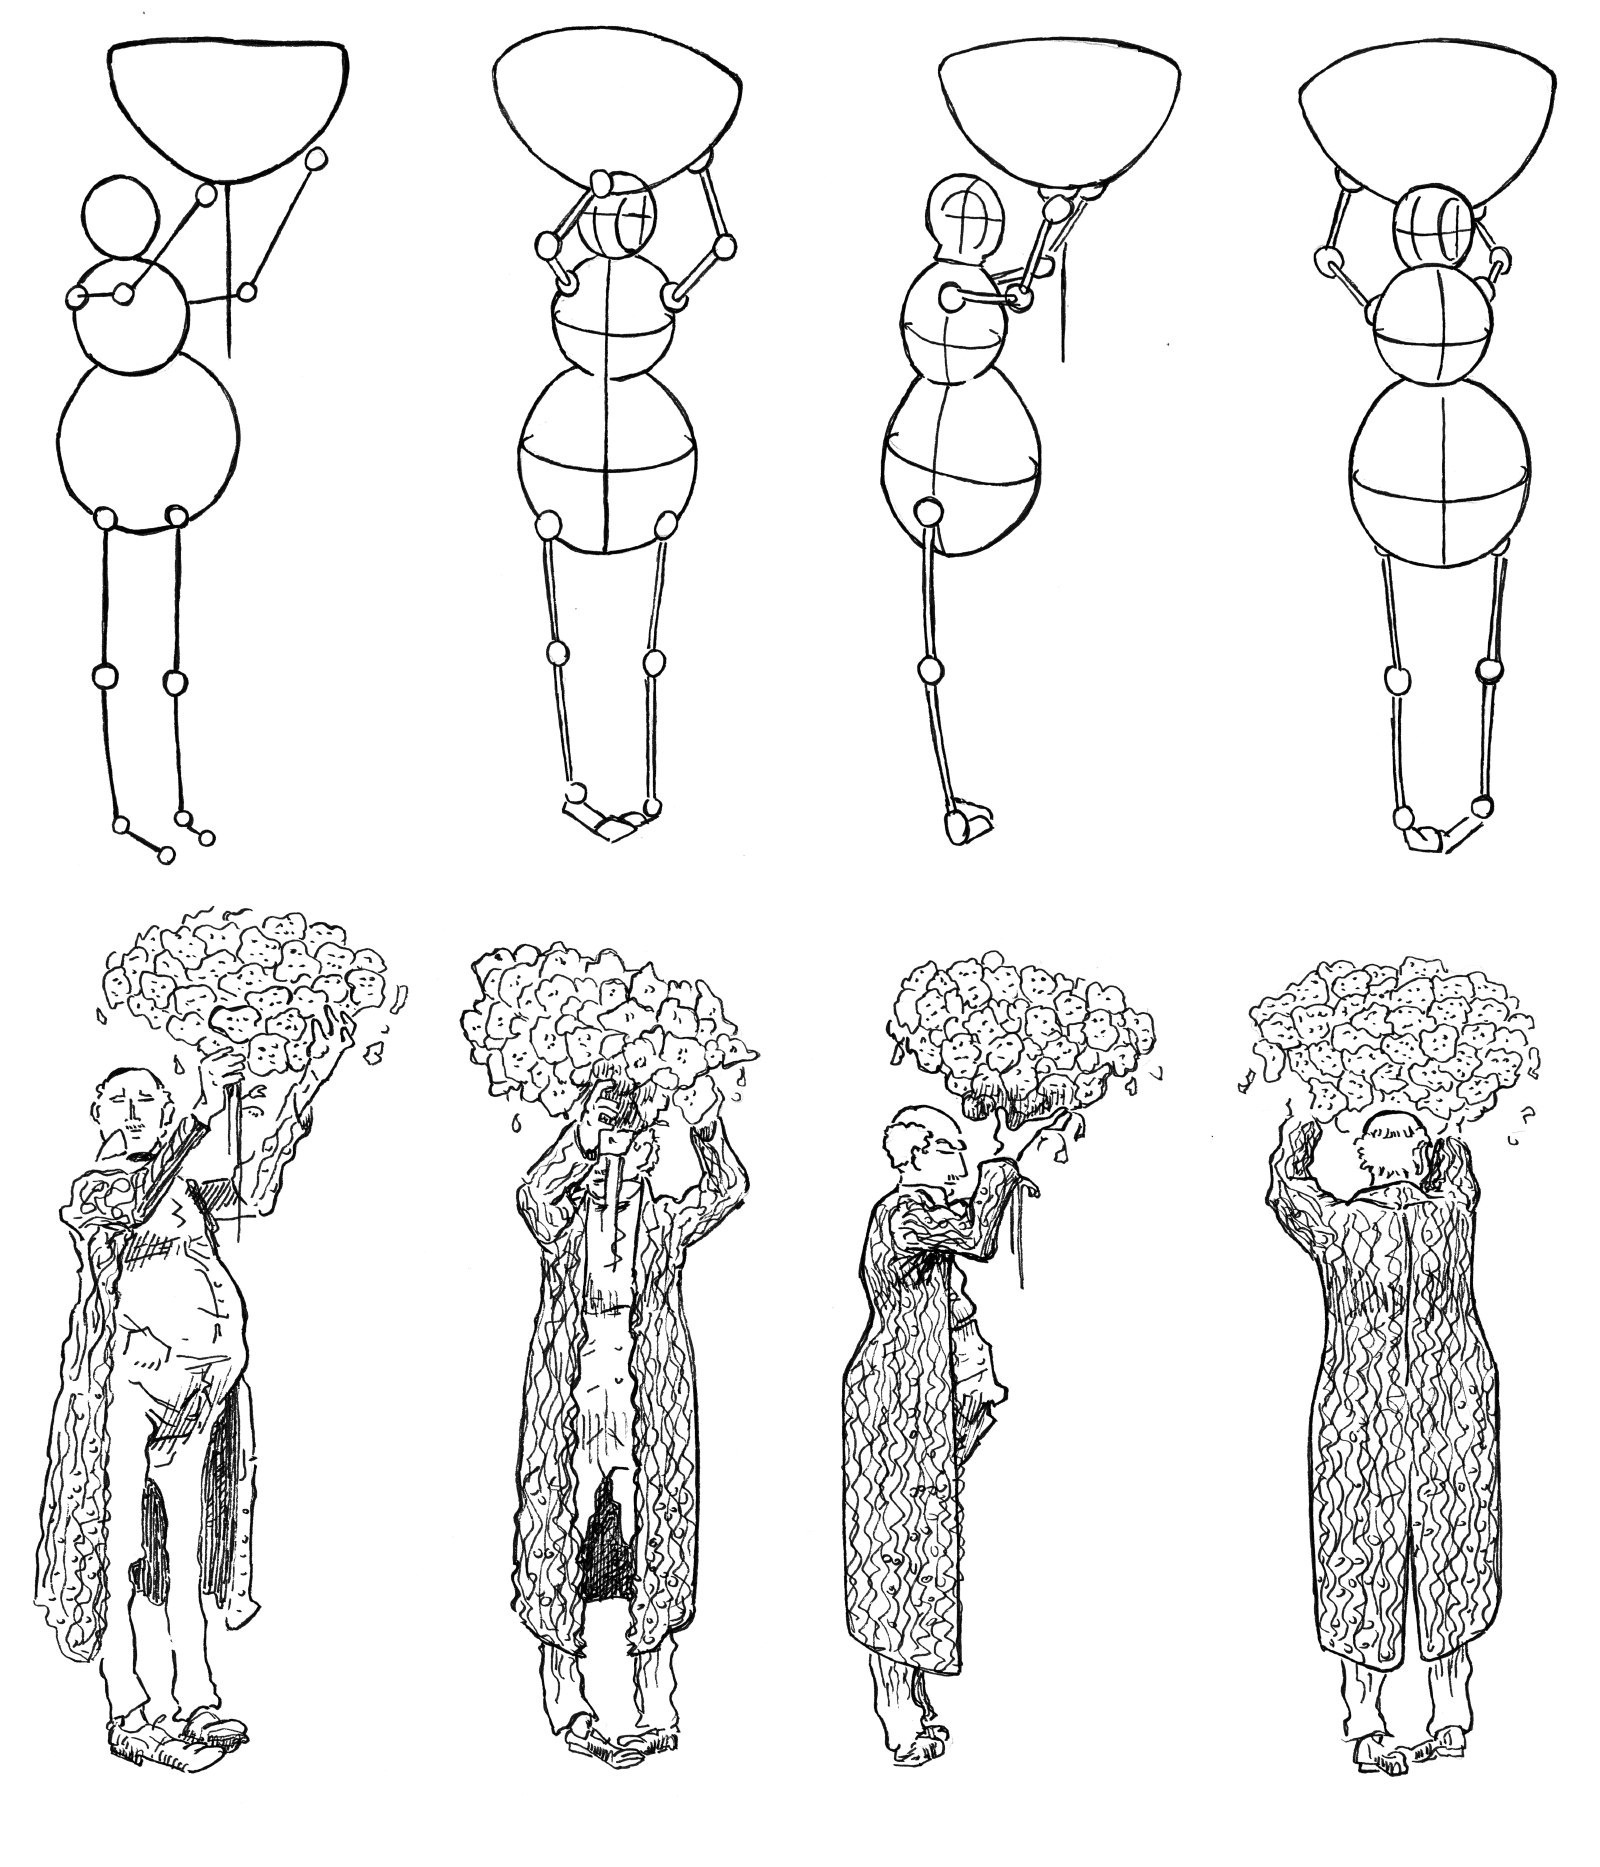 example of how a stick figure can be successfully used for gesture drawing to get the pose down